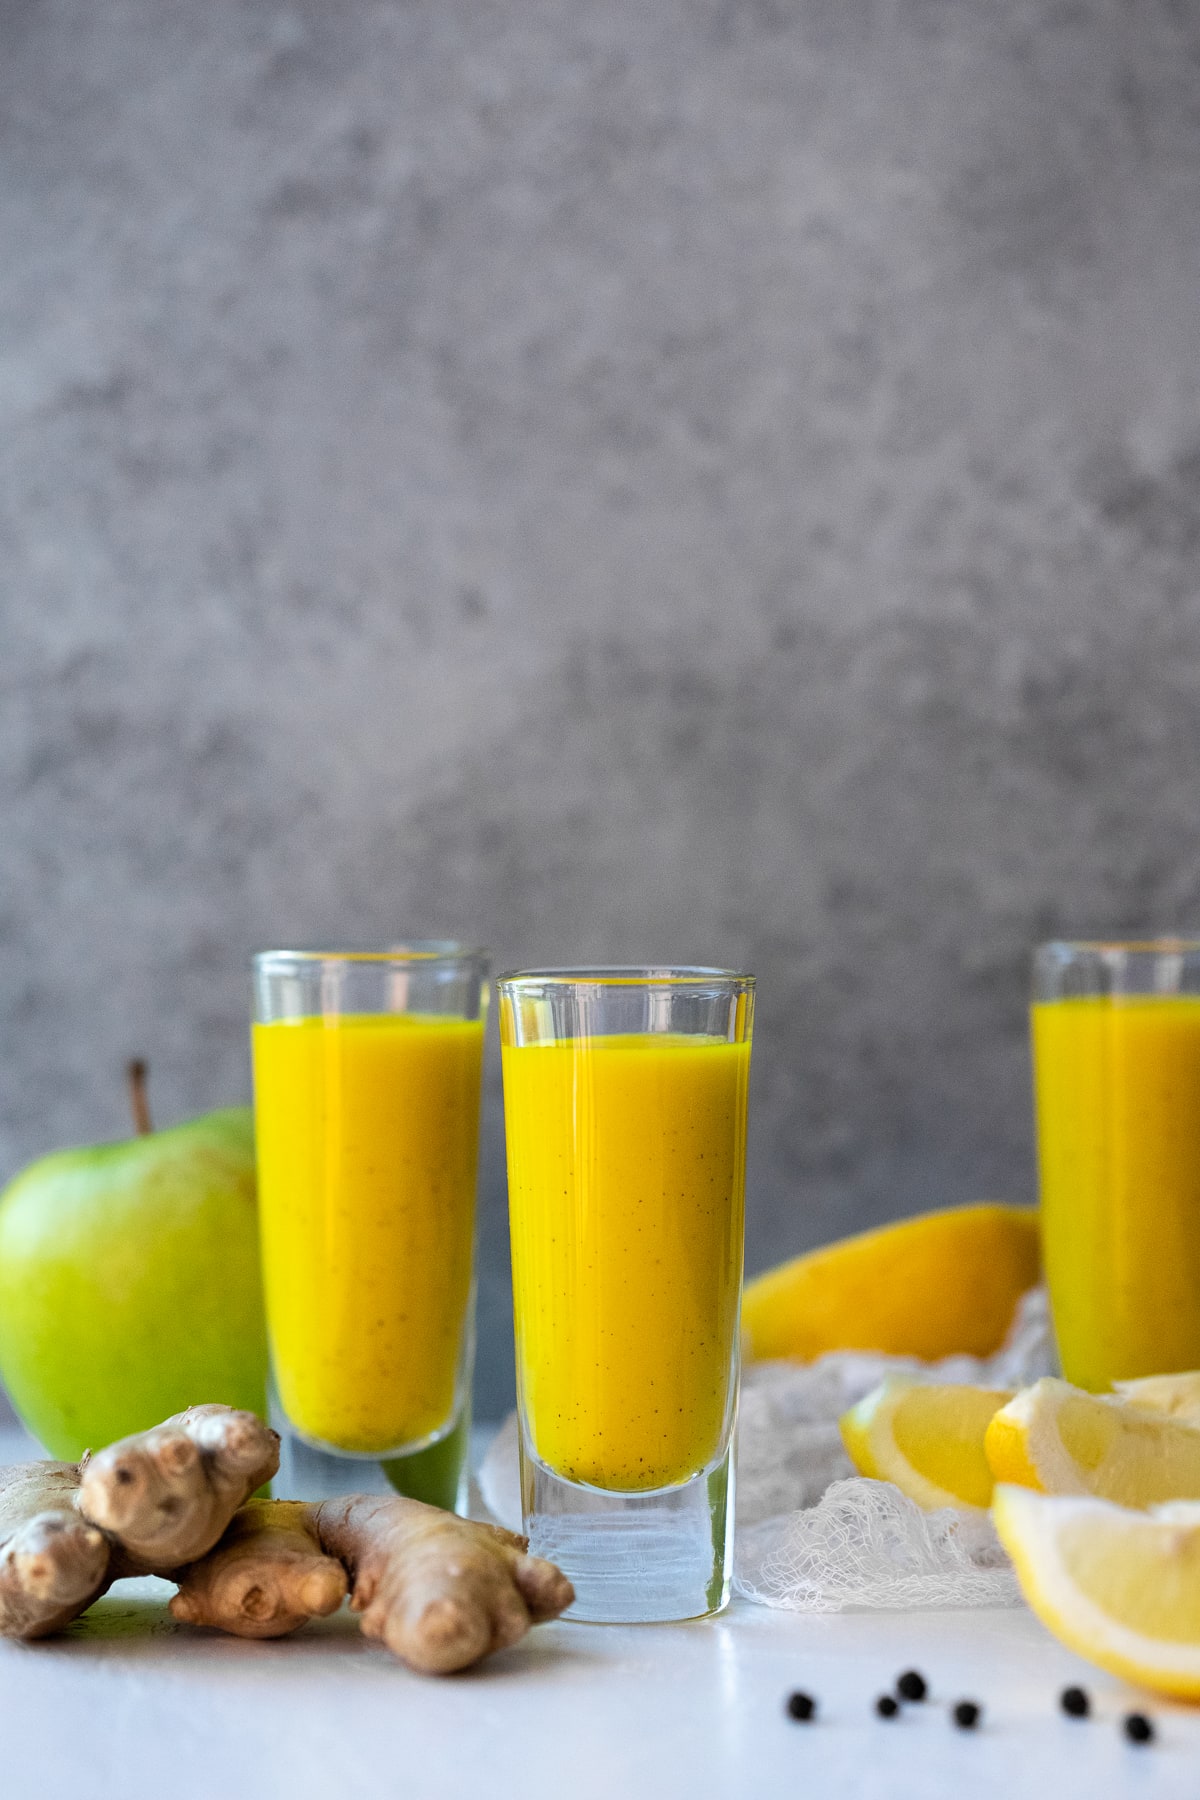 Juice shots surrounded by ingredients against a grey background.